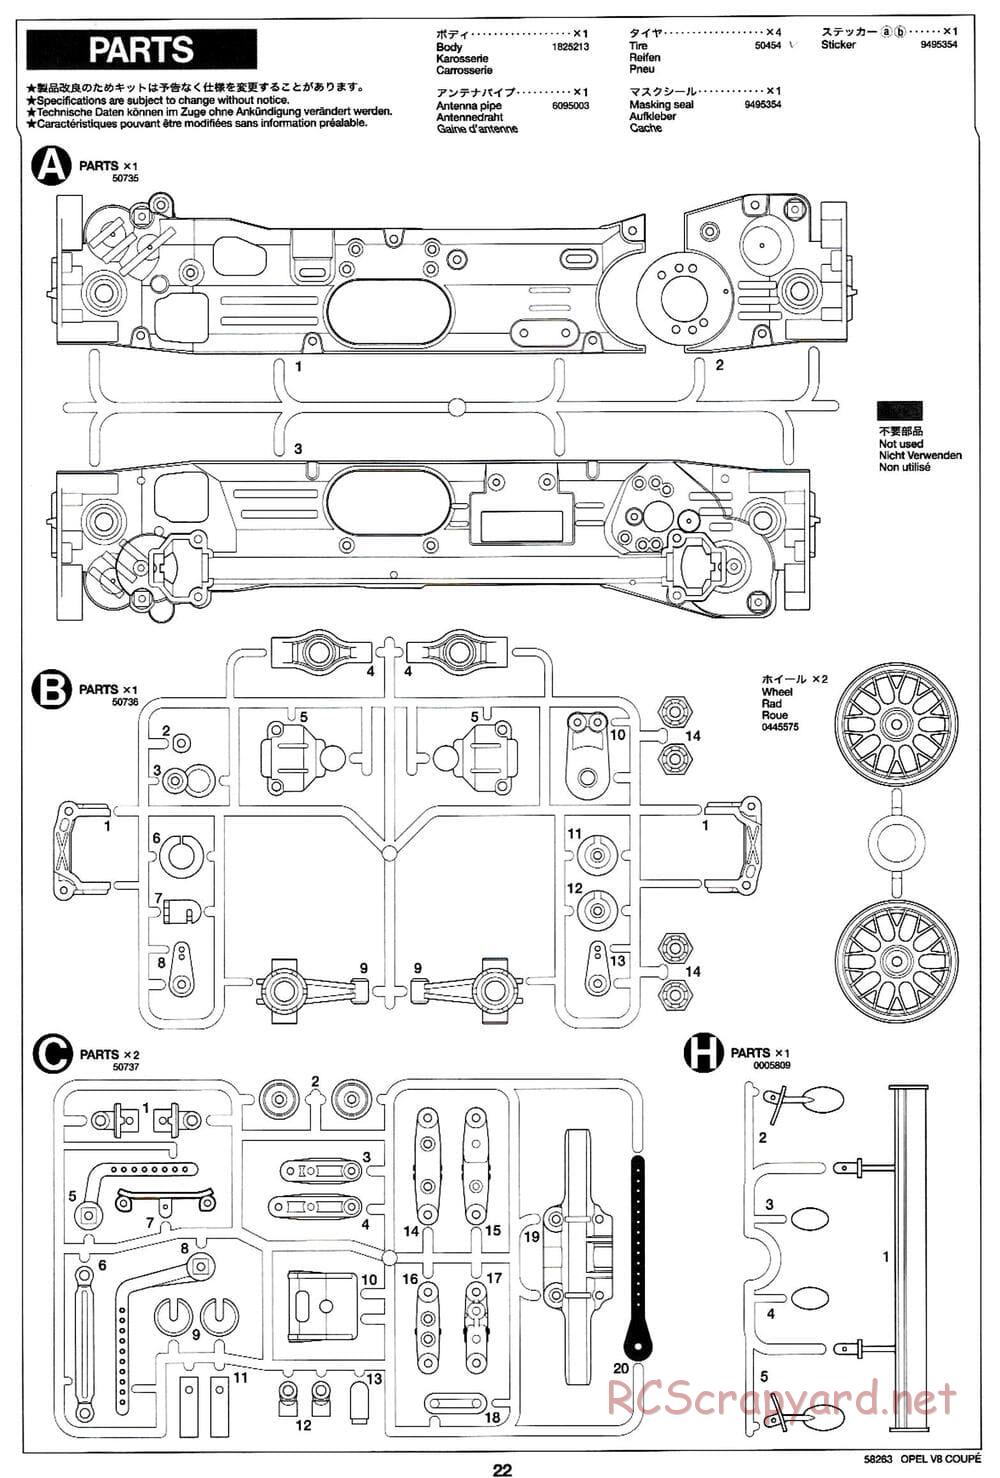 Tamiya - Opel V8 Coupe - TL-01 Chassis - Manual - Page 22